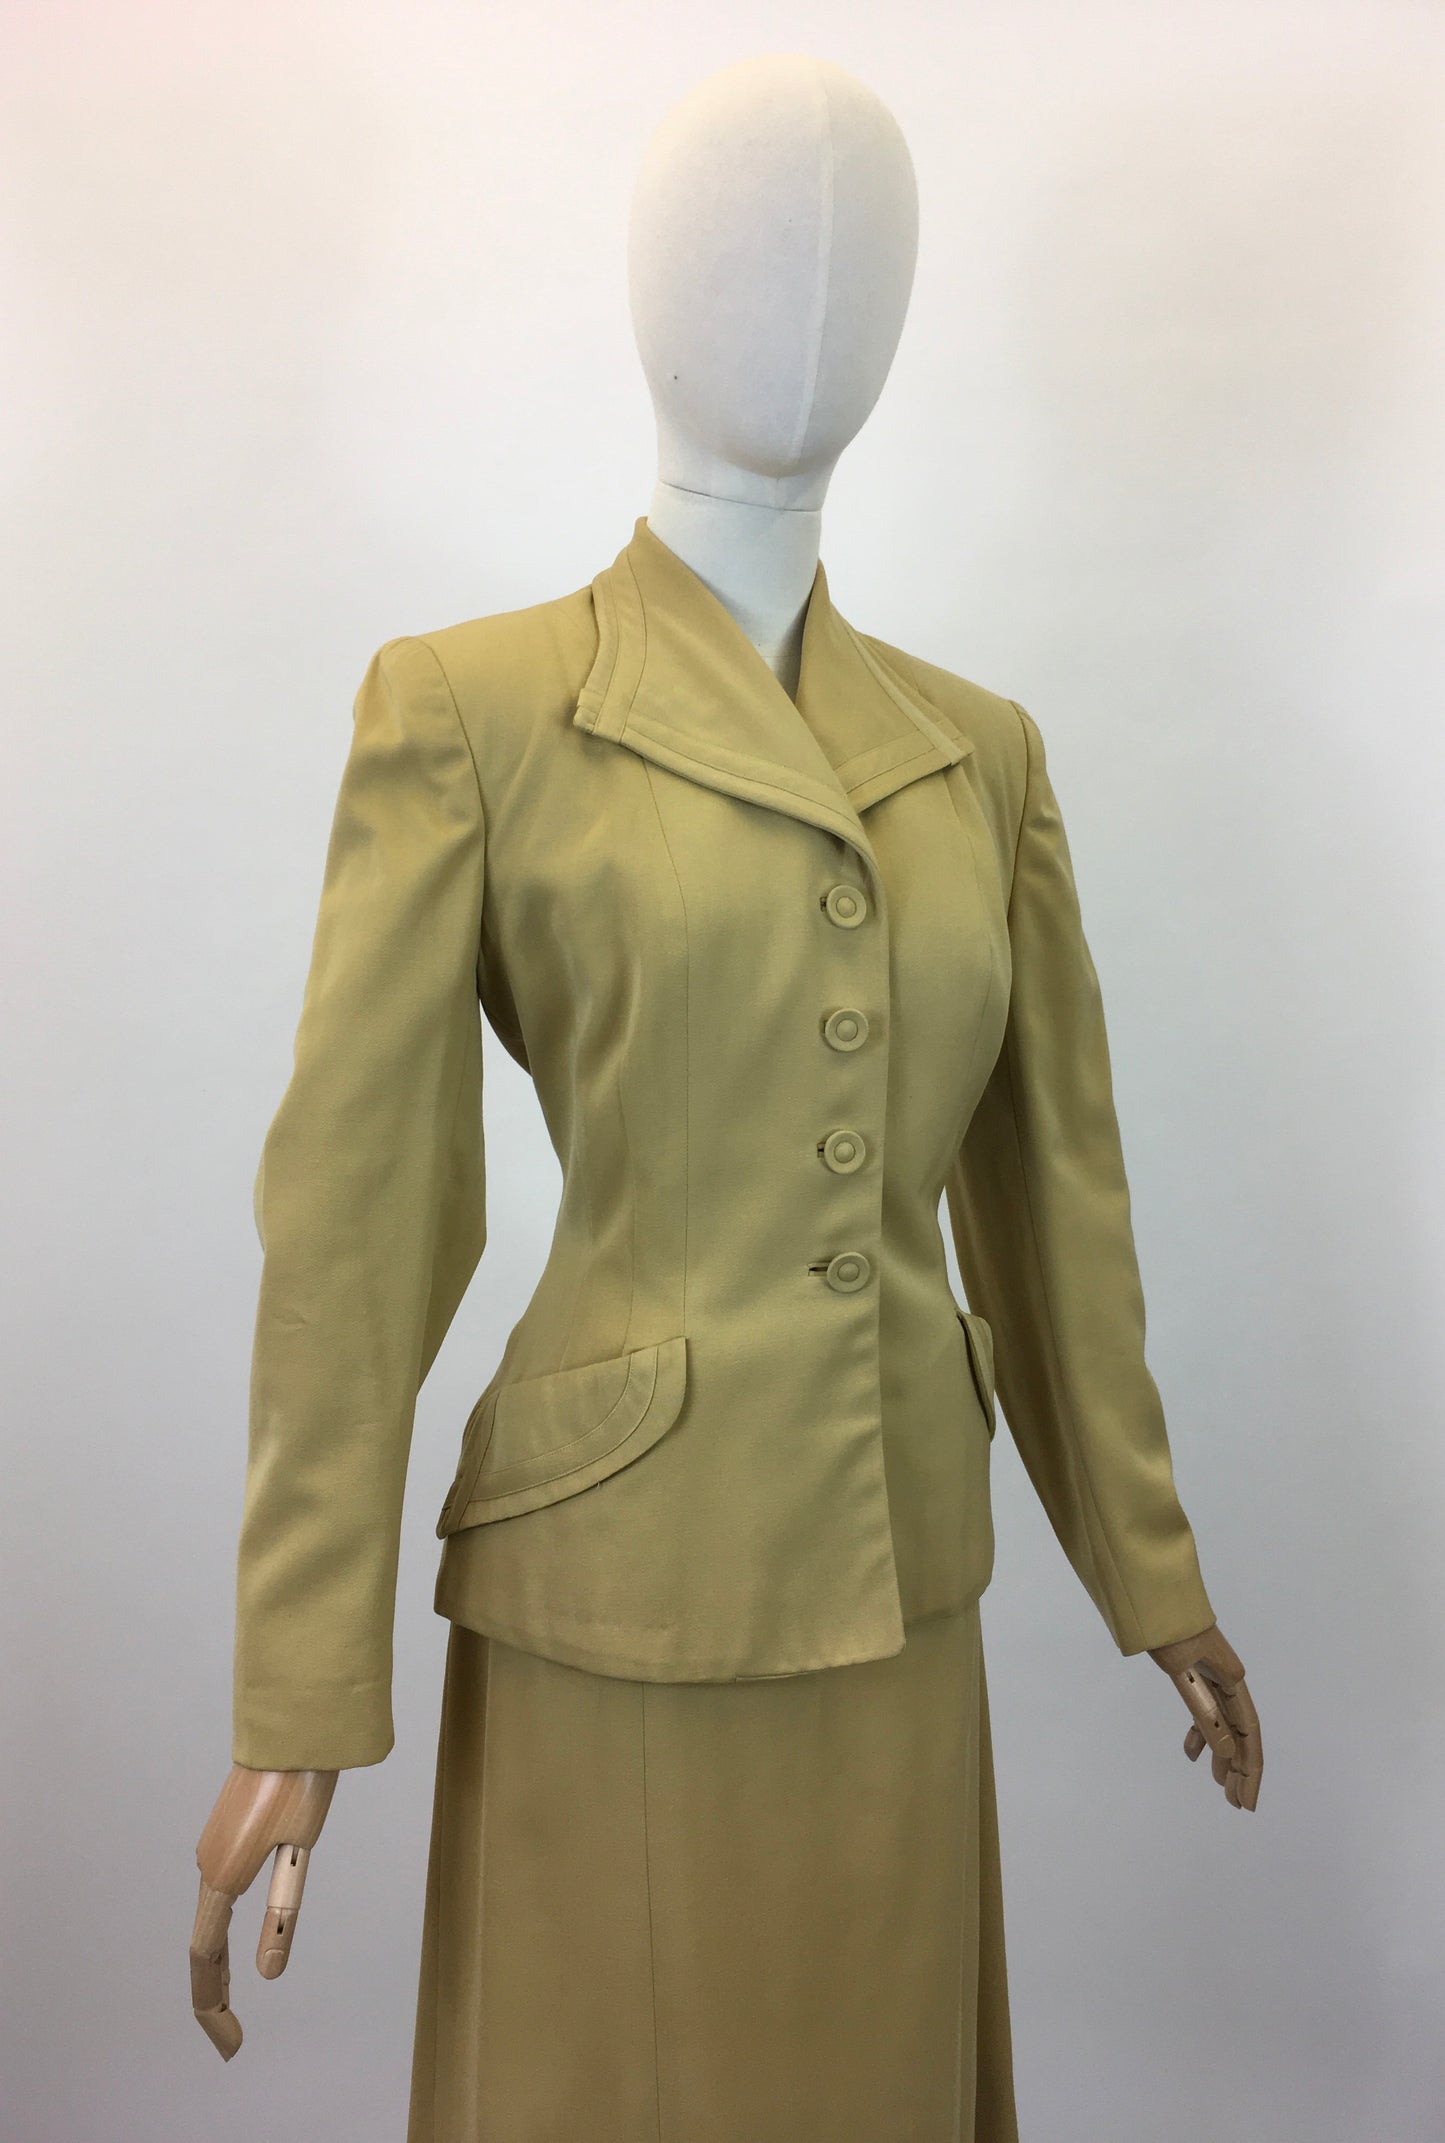 Original 1940's Stunning American 2Pc Suit - In A Light Mustard With Exquisite Details